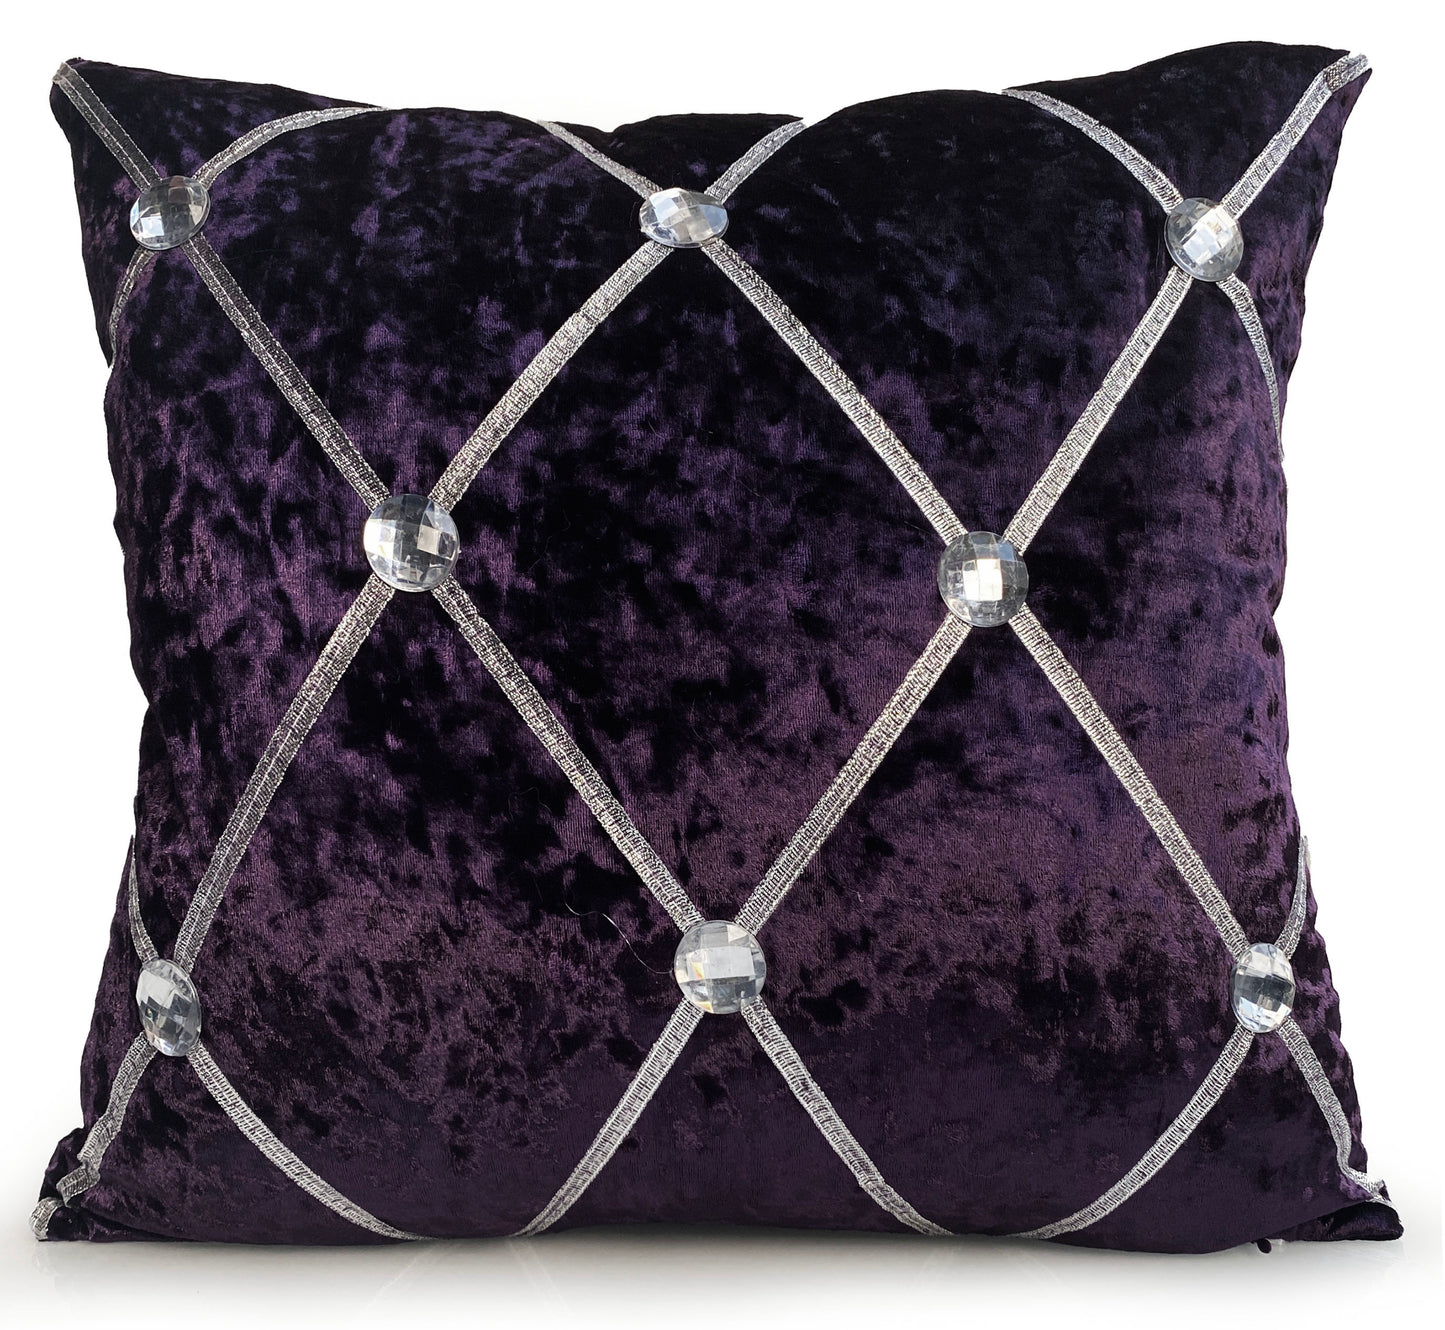 Large Crush Velvet Diamante Chesterfield Cushions or Covers Purple